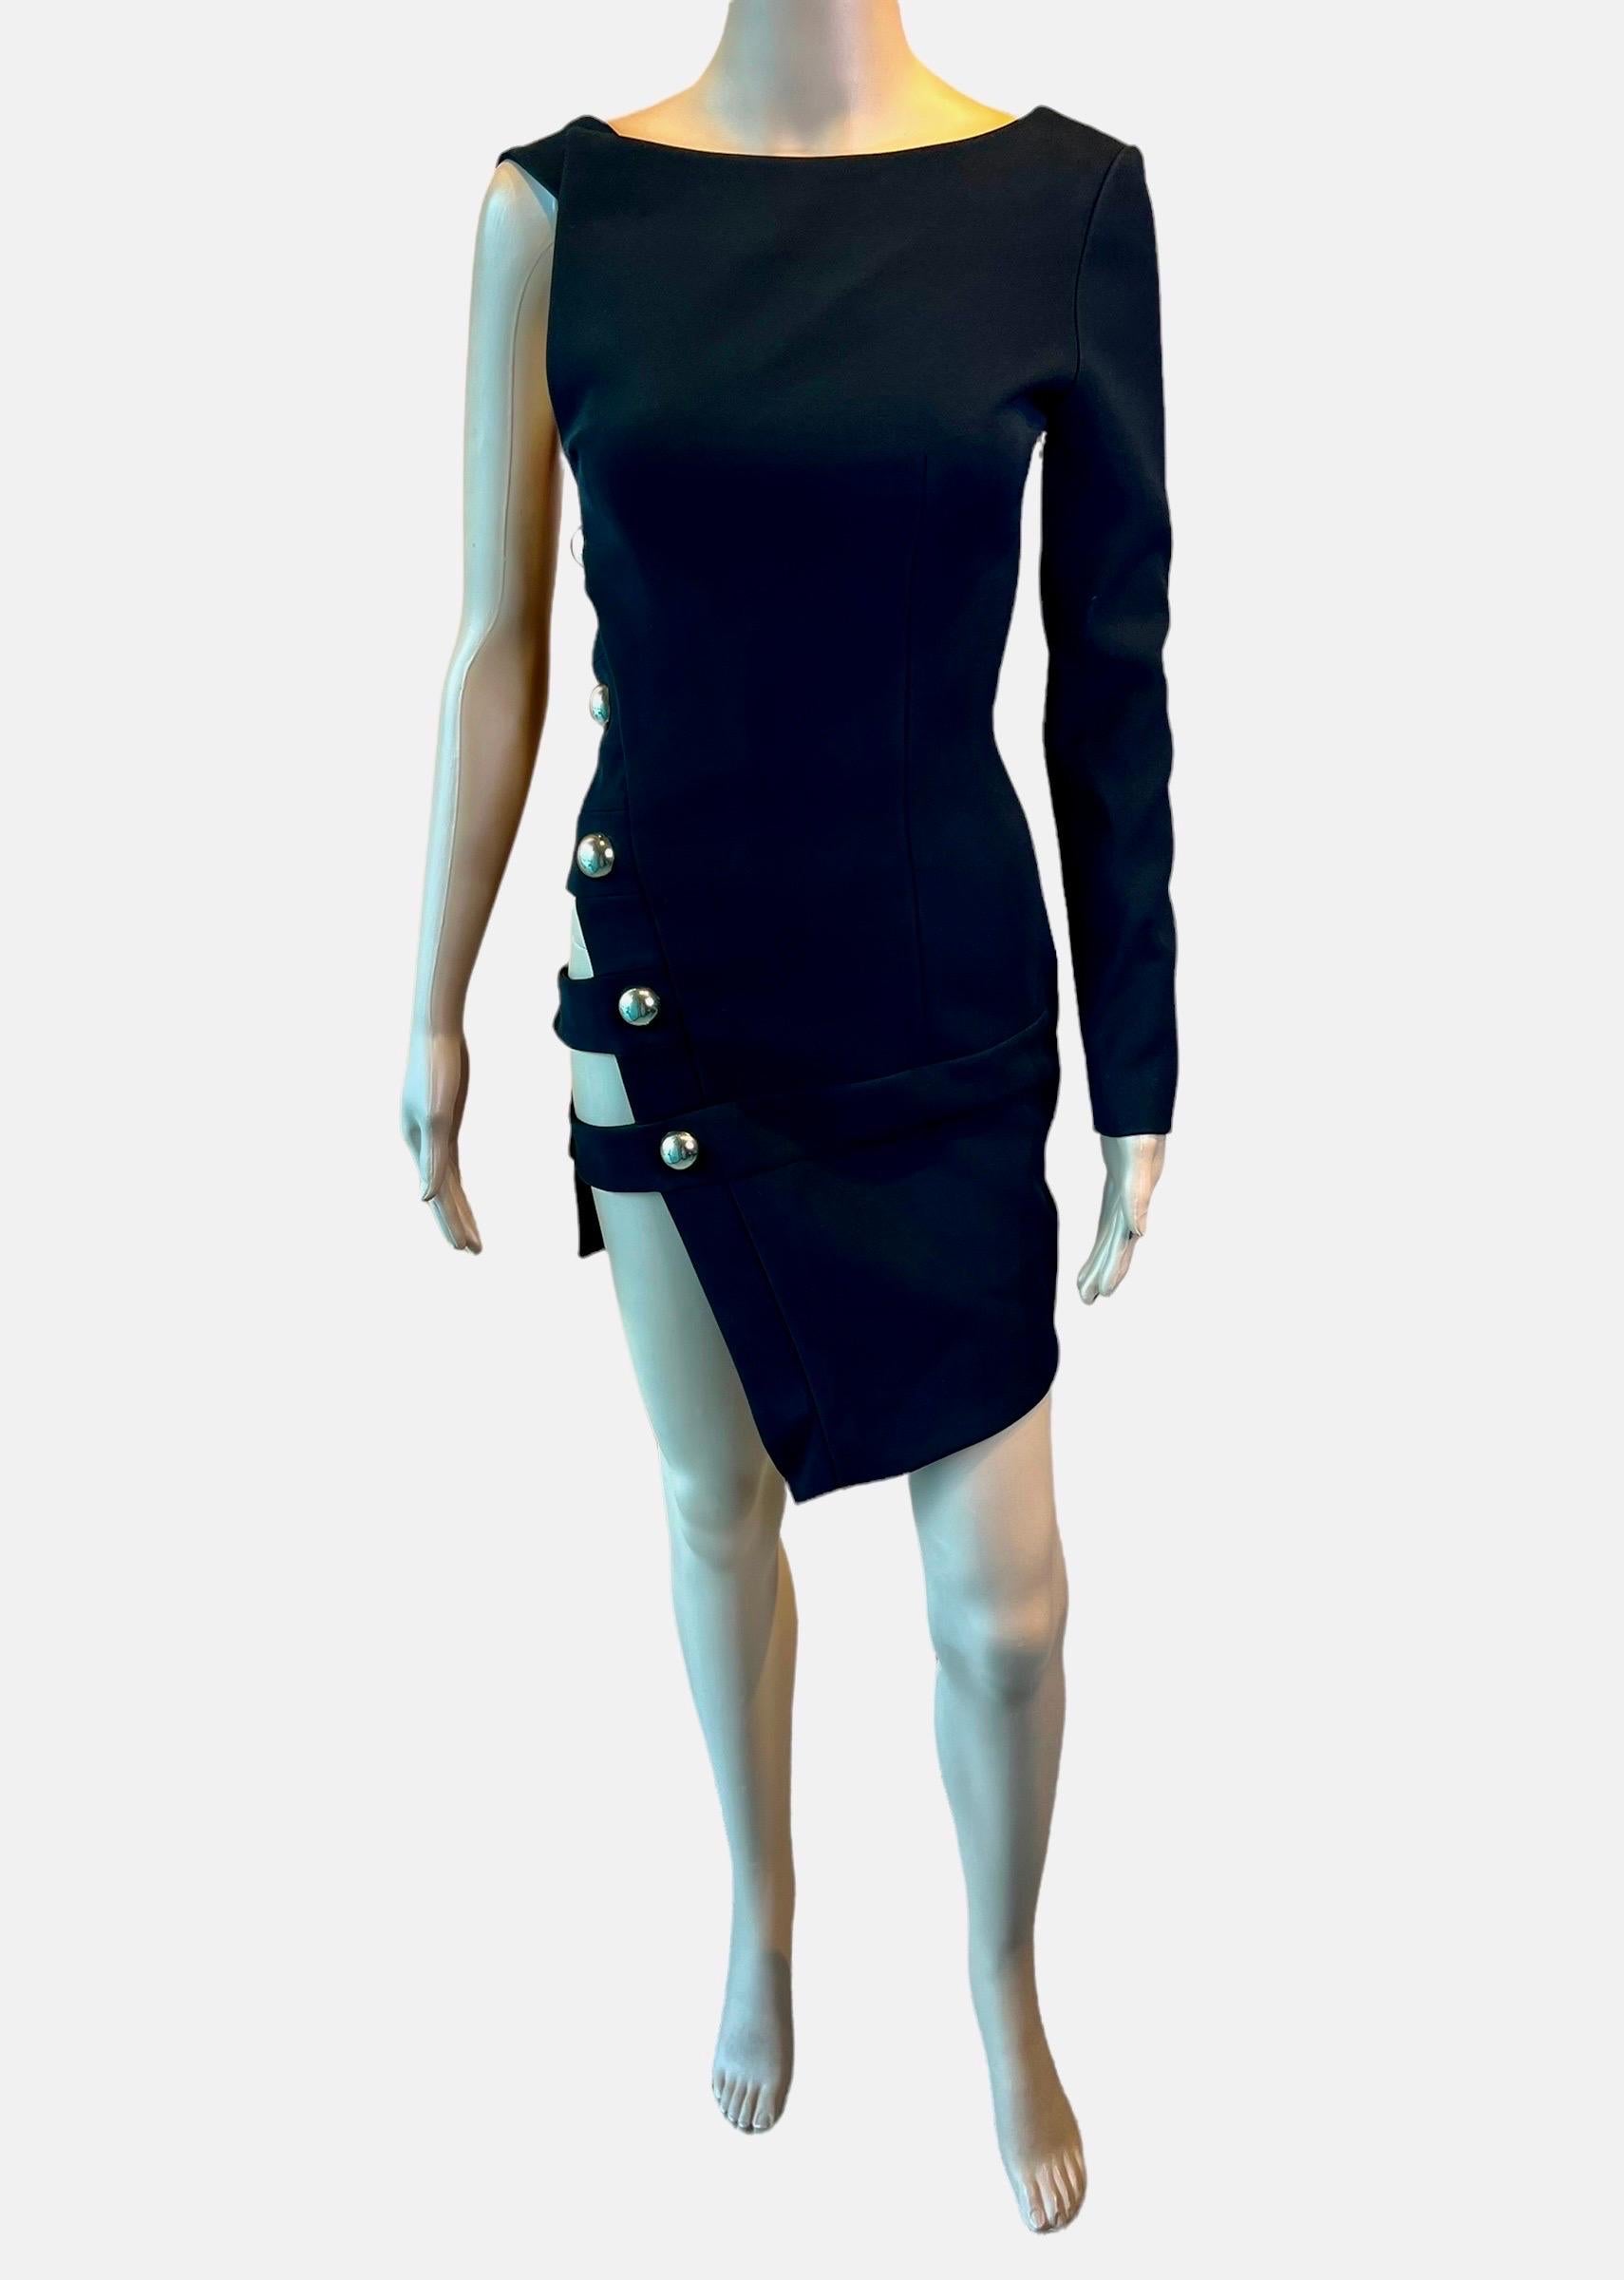 Anthony Vaccarello S/S 2014 Runway Cutout One Sleeve Black Mini Dress For Sale 5